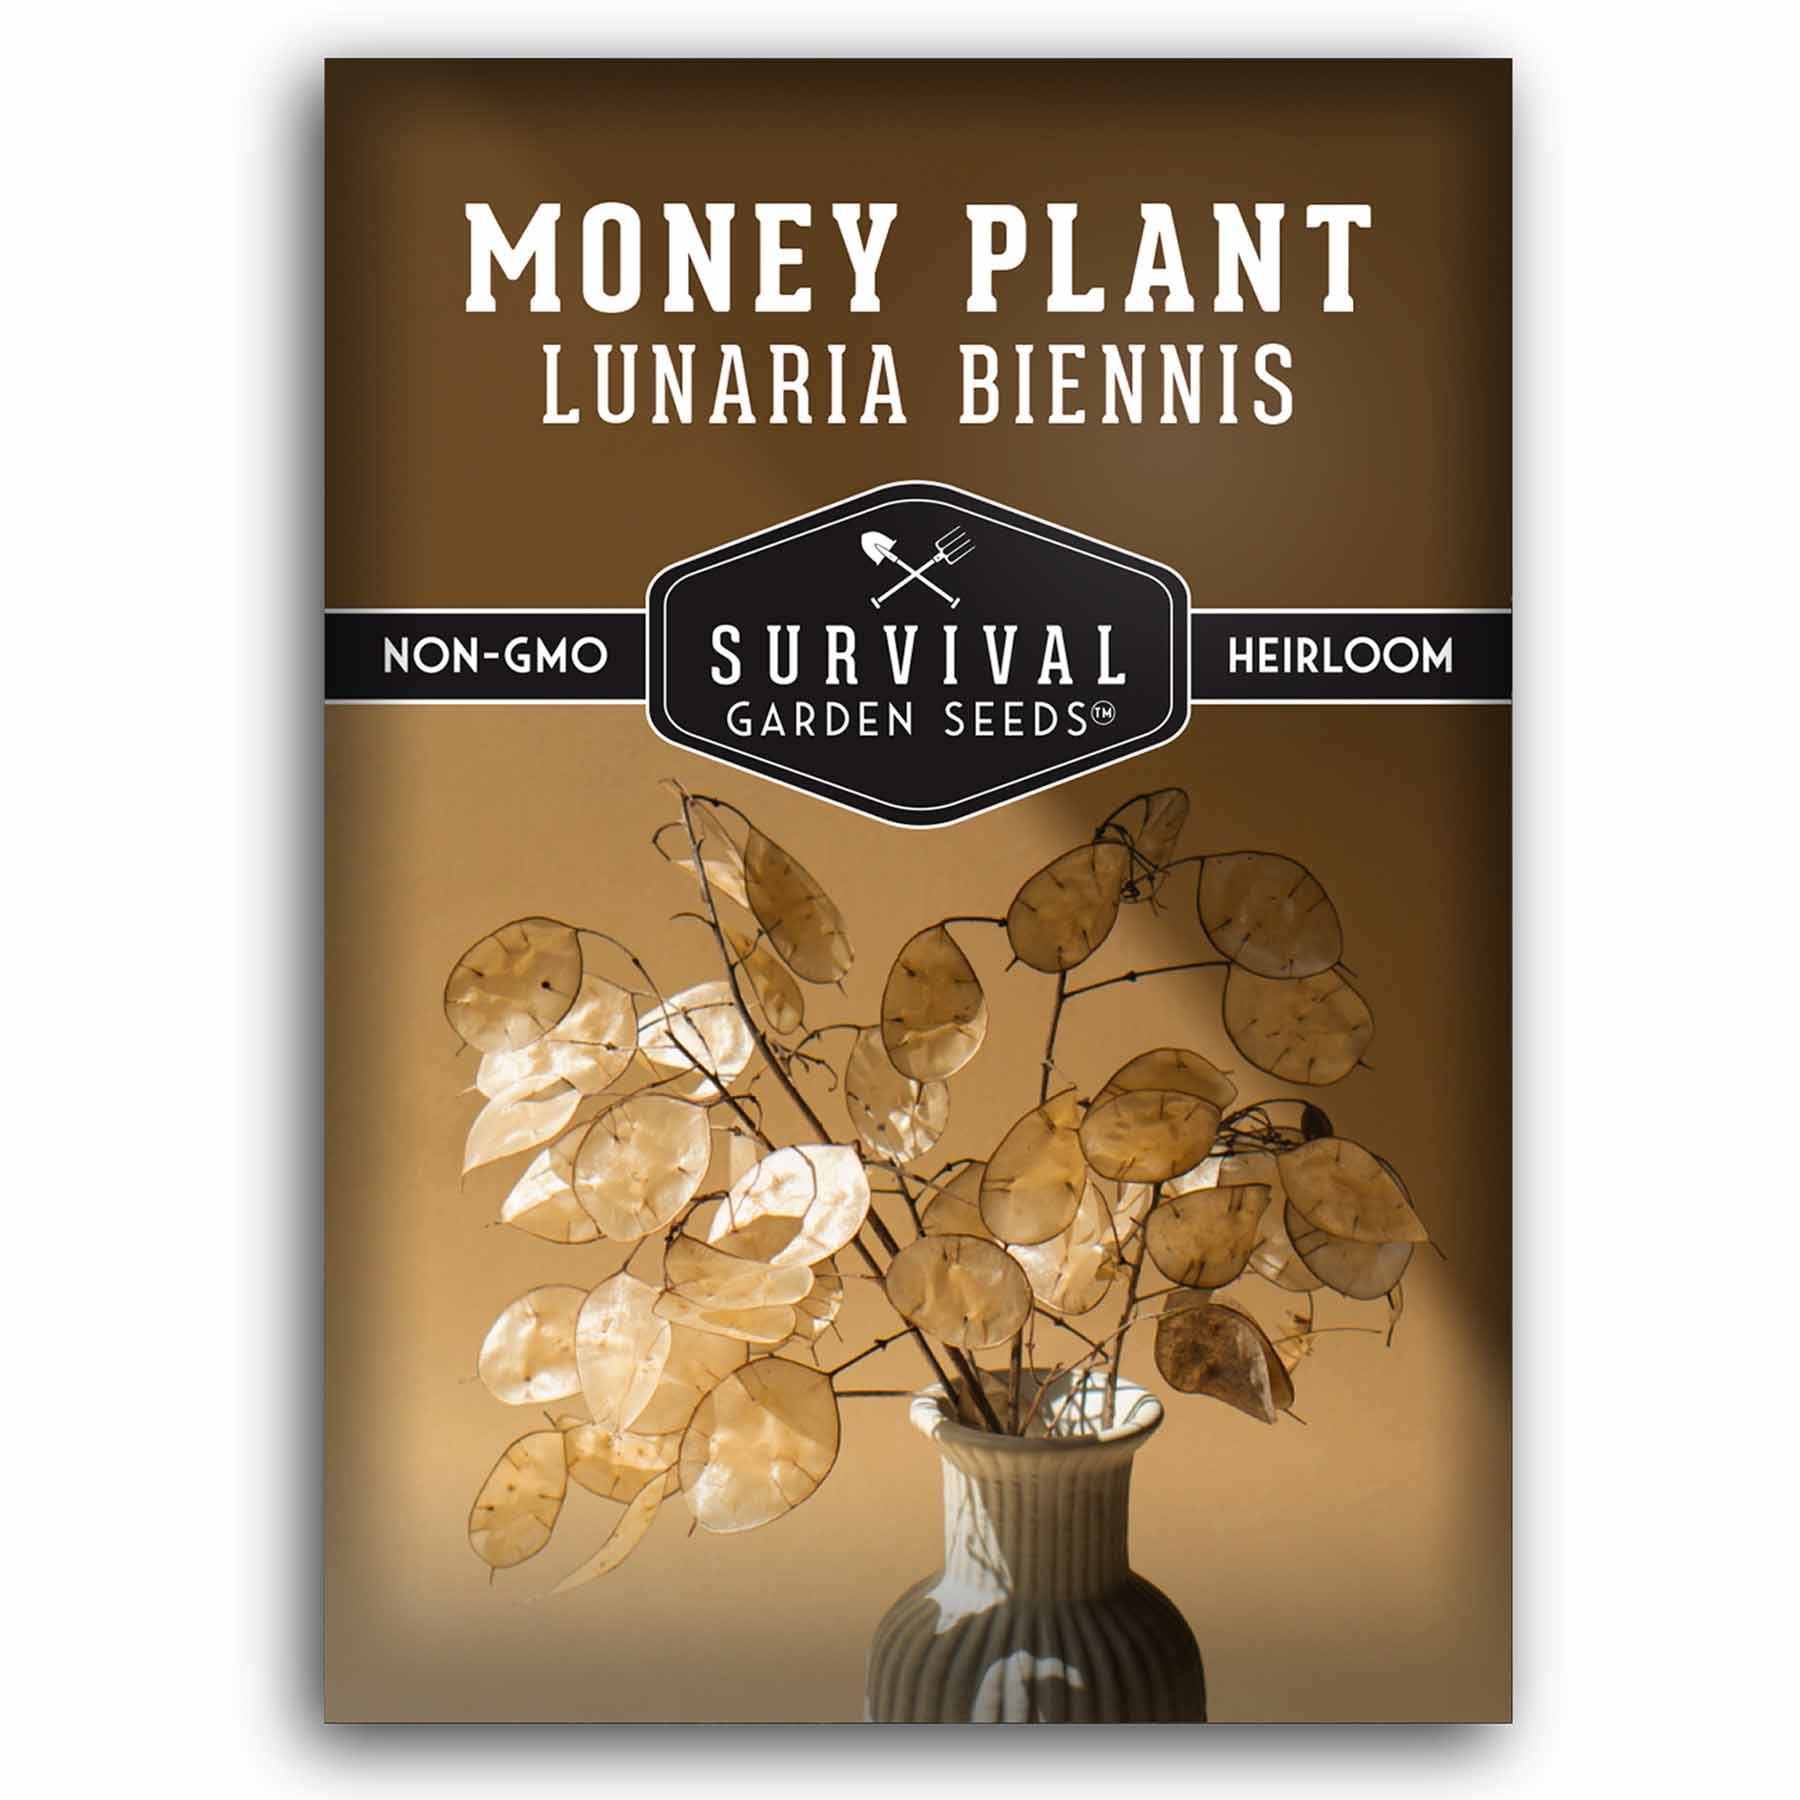 1 packet of Money Plant seeds